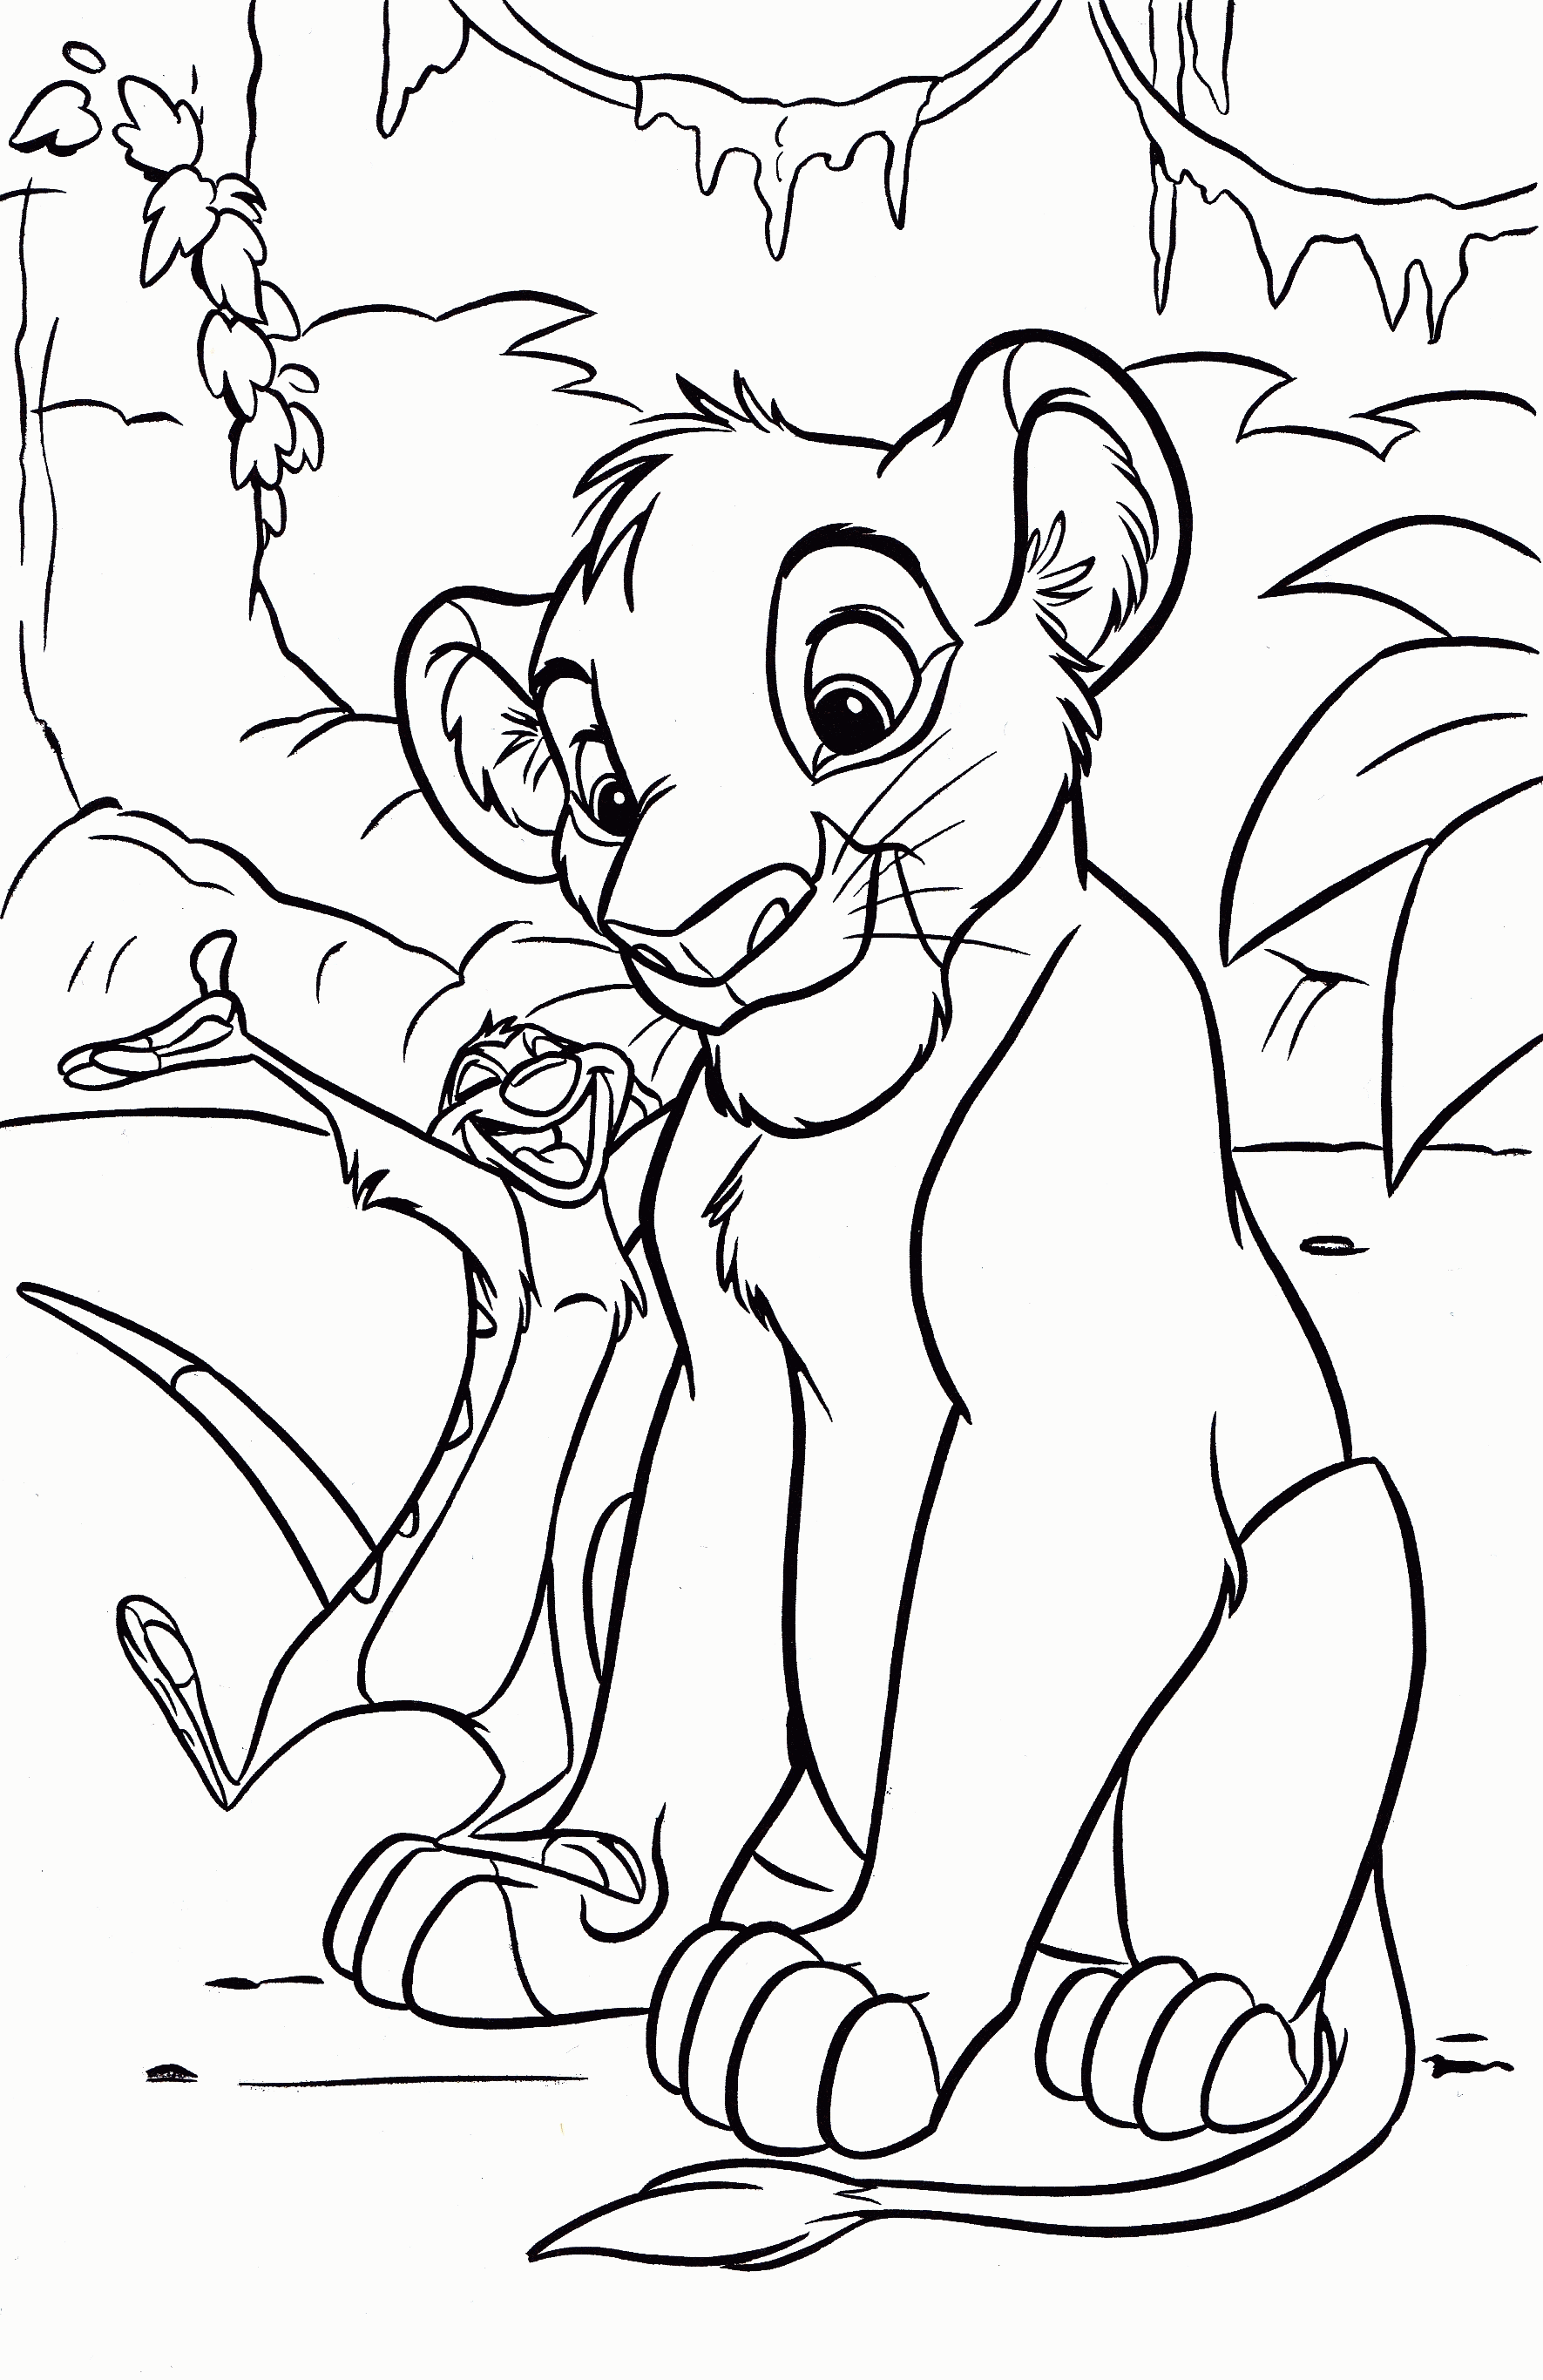 Disney Printing Coloring Pages - Coloring Page Photos - Clip Art Library